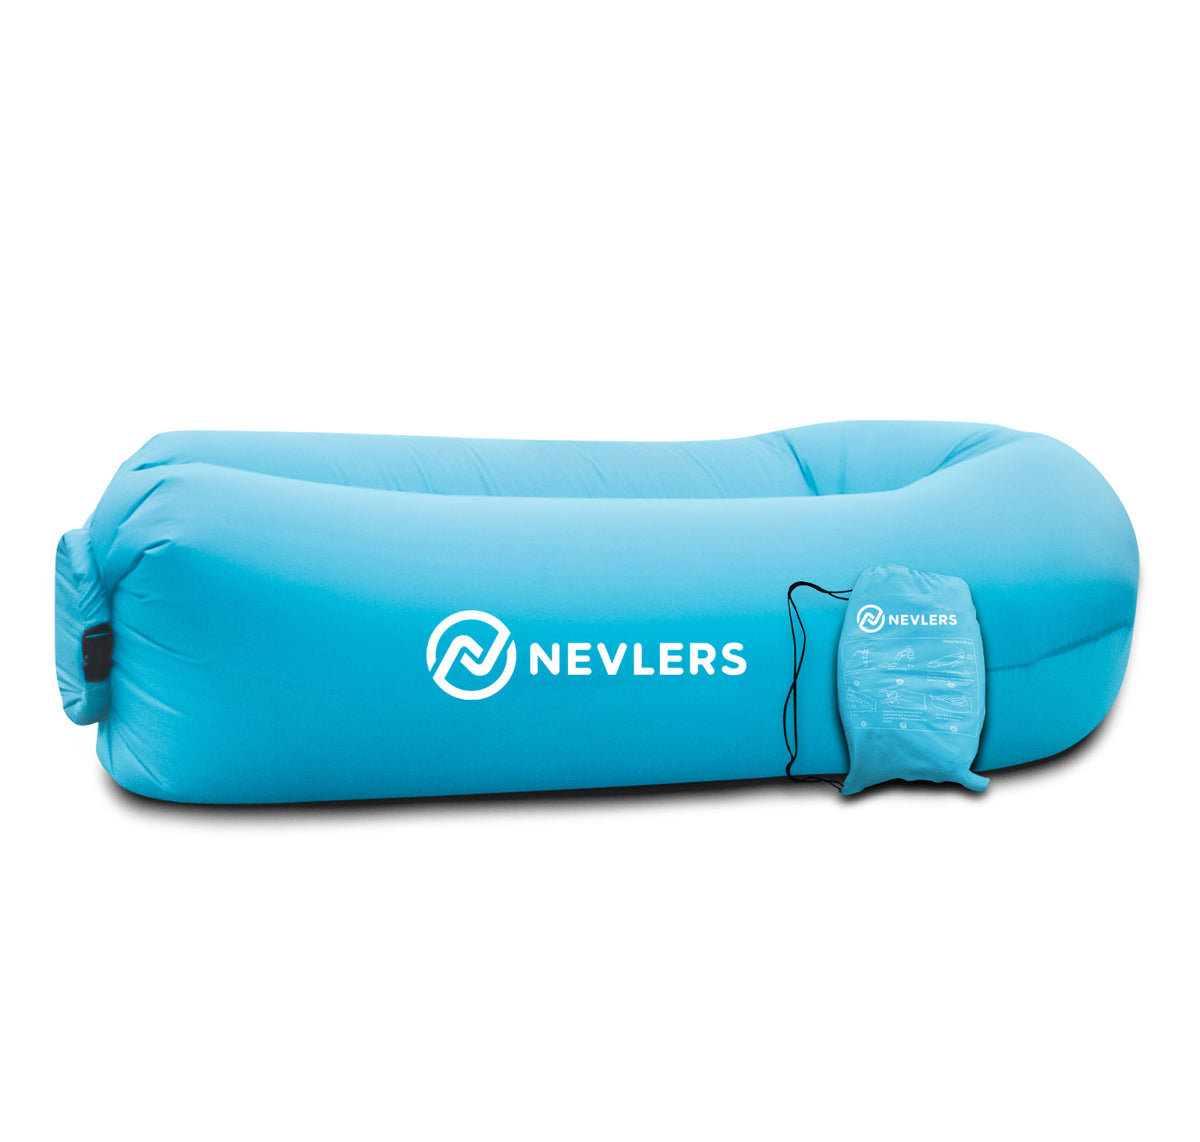 Inflatable Lounger - Blue - 1 Pack